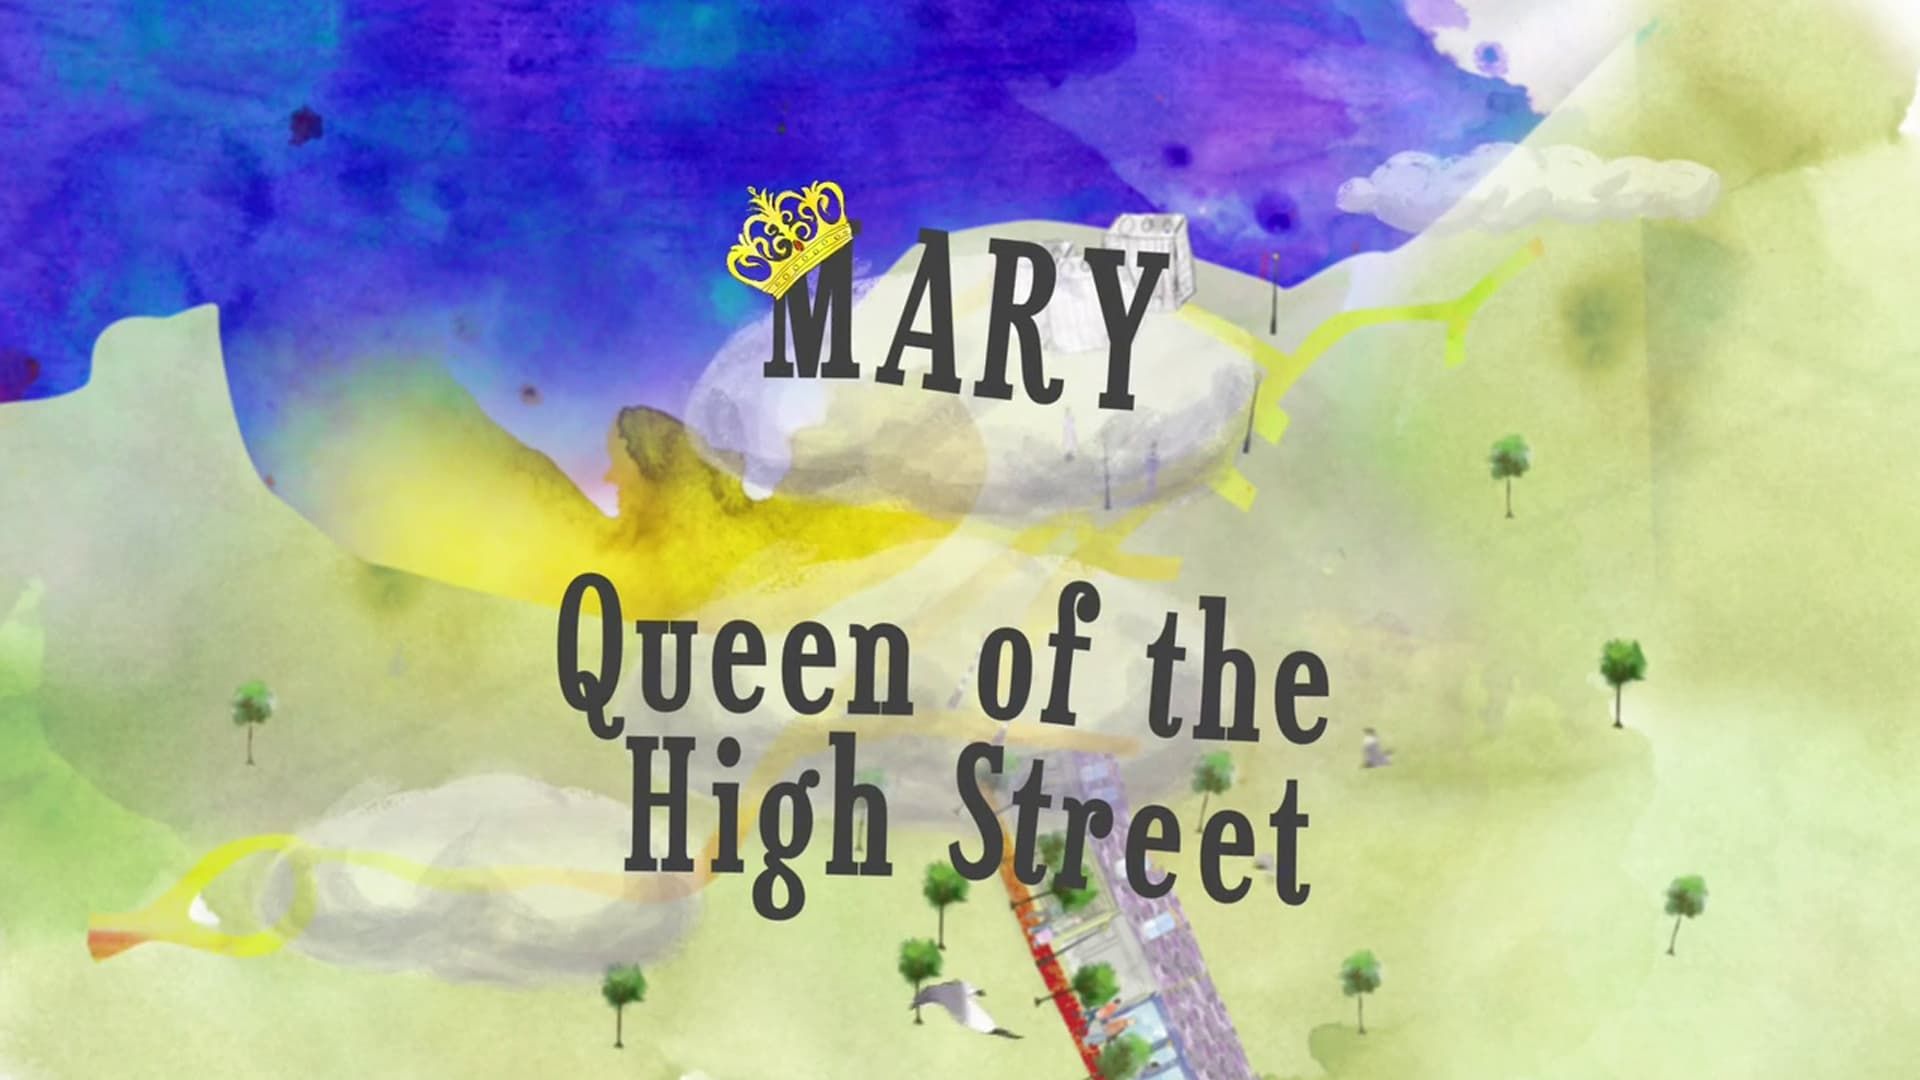 Mary: Queen of the High Street background